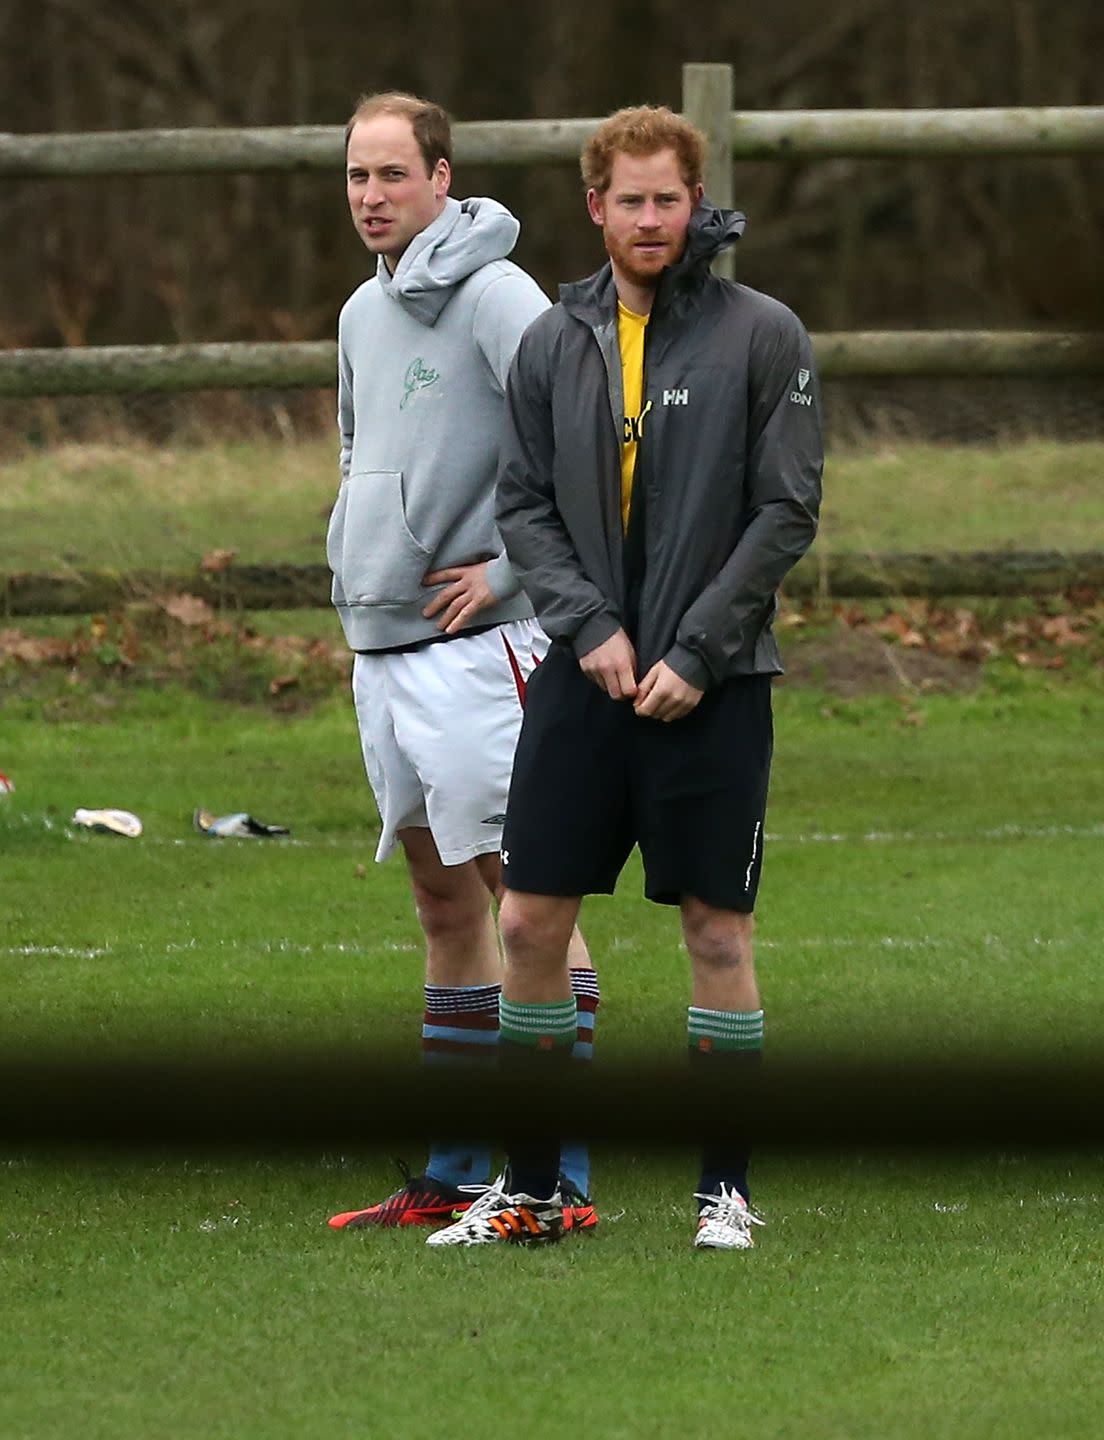 kings lynn, england december 24 prince william, duke of cambridge and prince harry play football in the annual sandringham football match at sandringham on december 24, 2015 in kings lynn, england photo by danny e martindalegc images